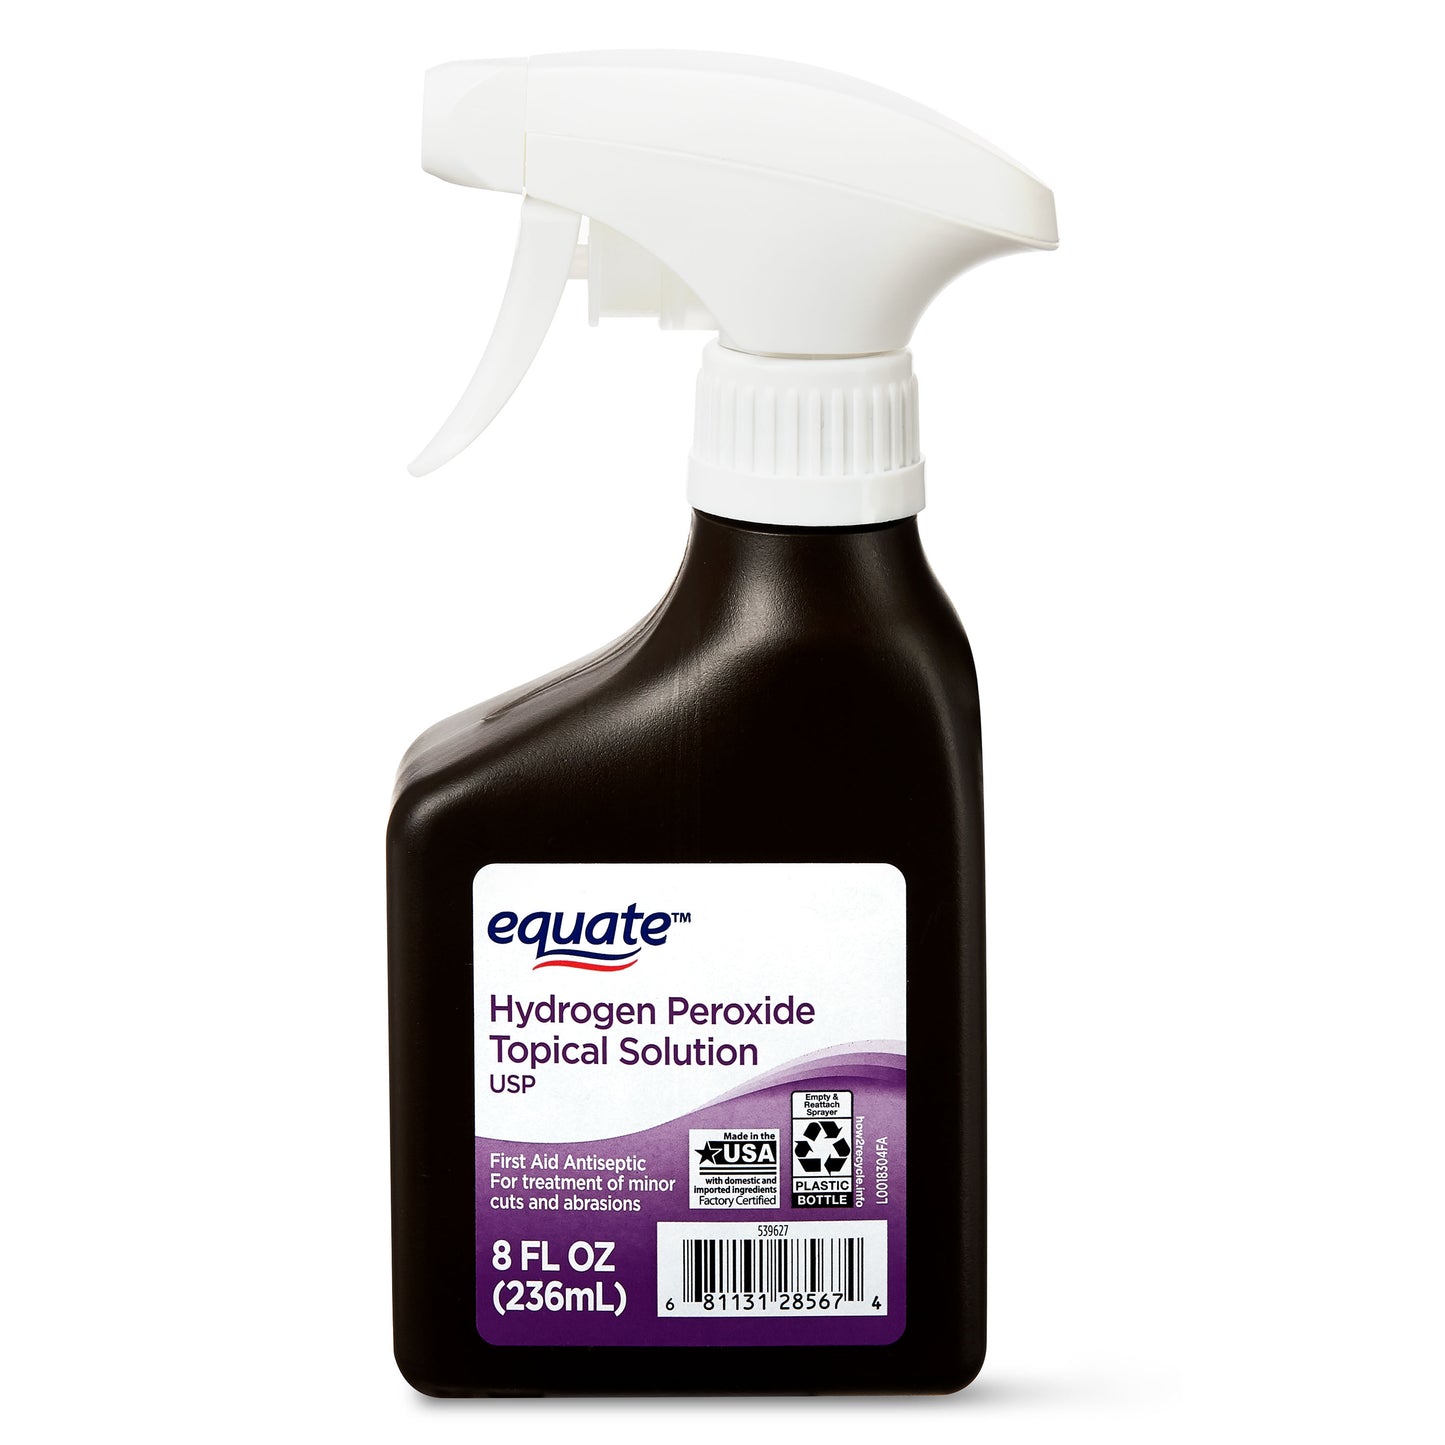 Equate Hydrogen Peroxide Topical Solution Antiseptic Spray, 8 fl oz (2 Pack)